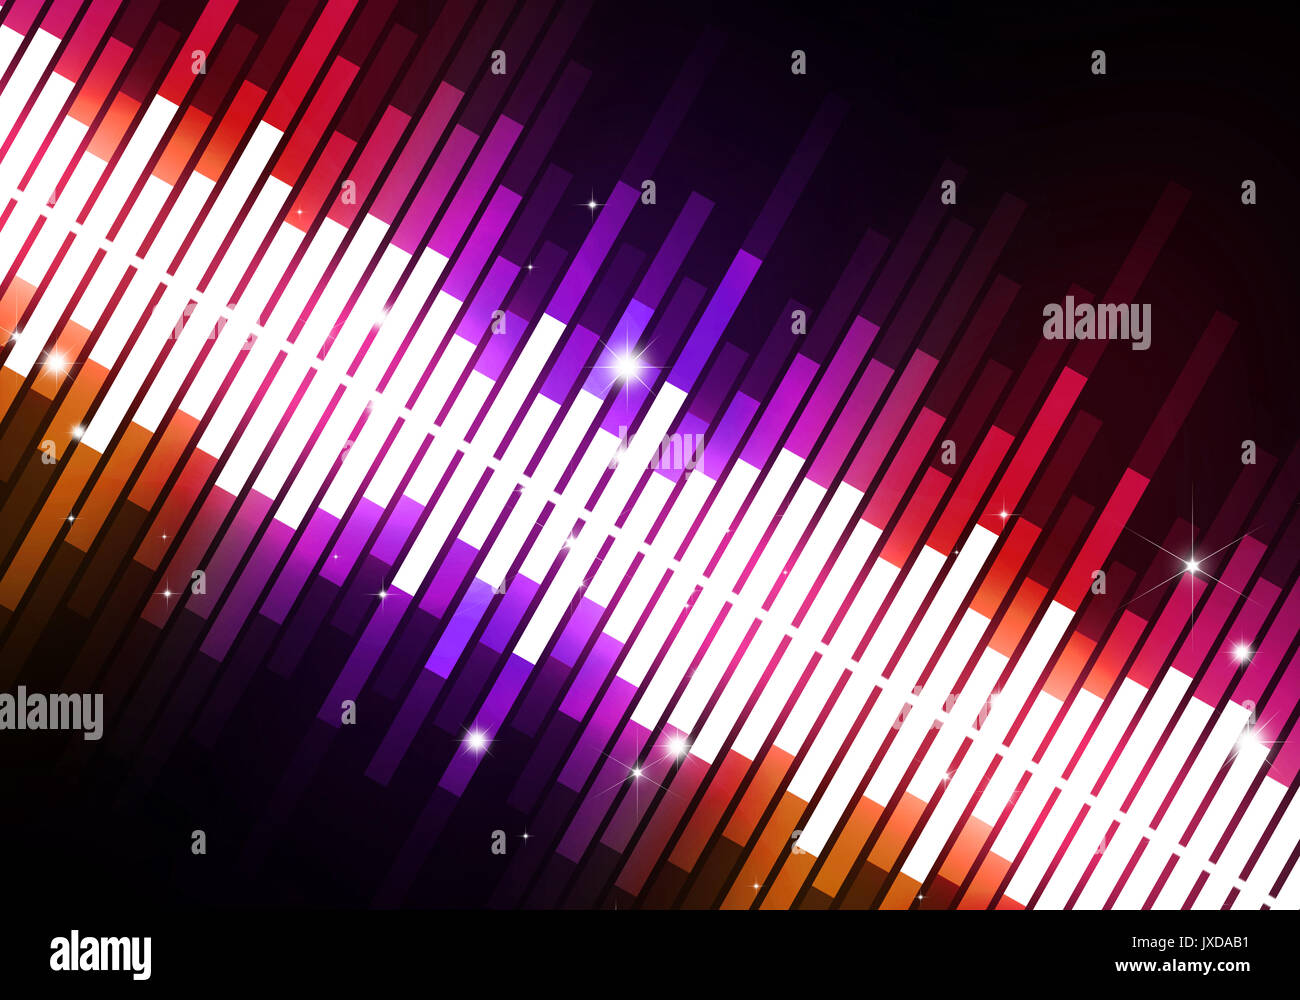 abstract multicolor music equalizer background for party events Stock Photo